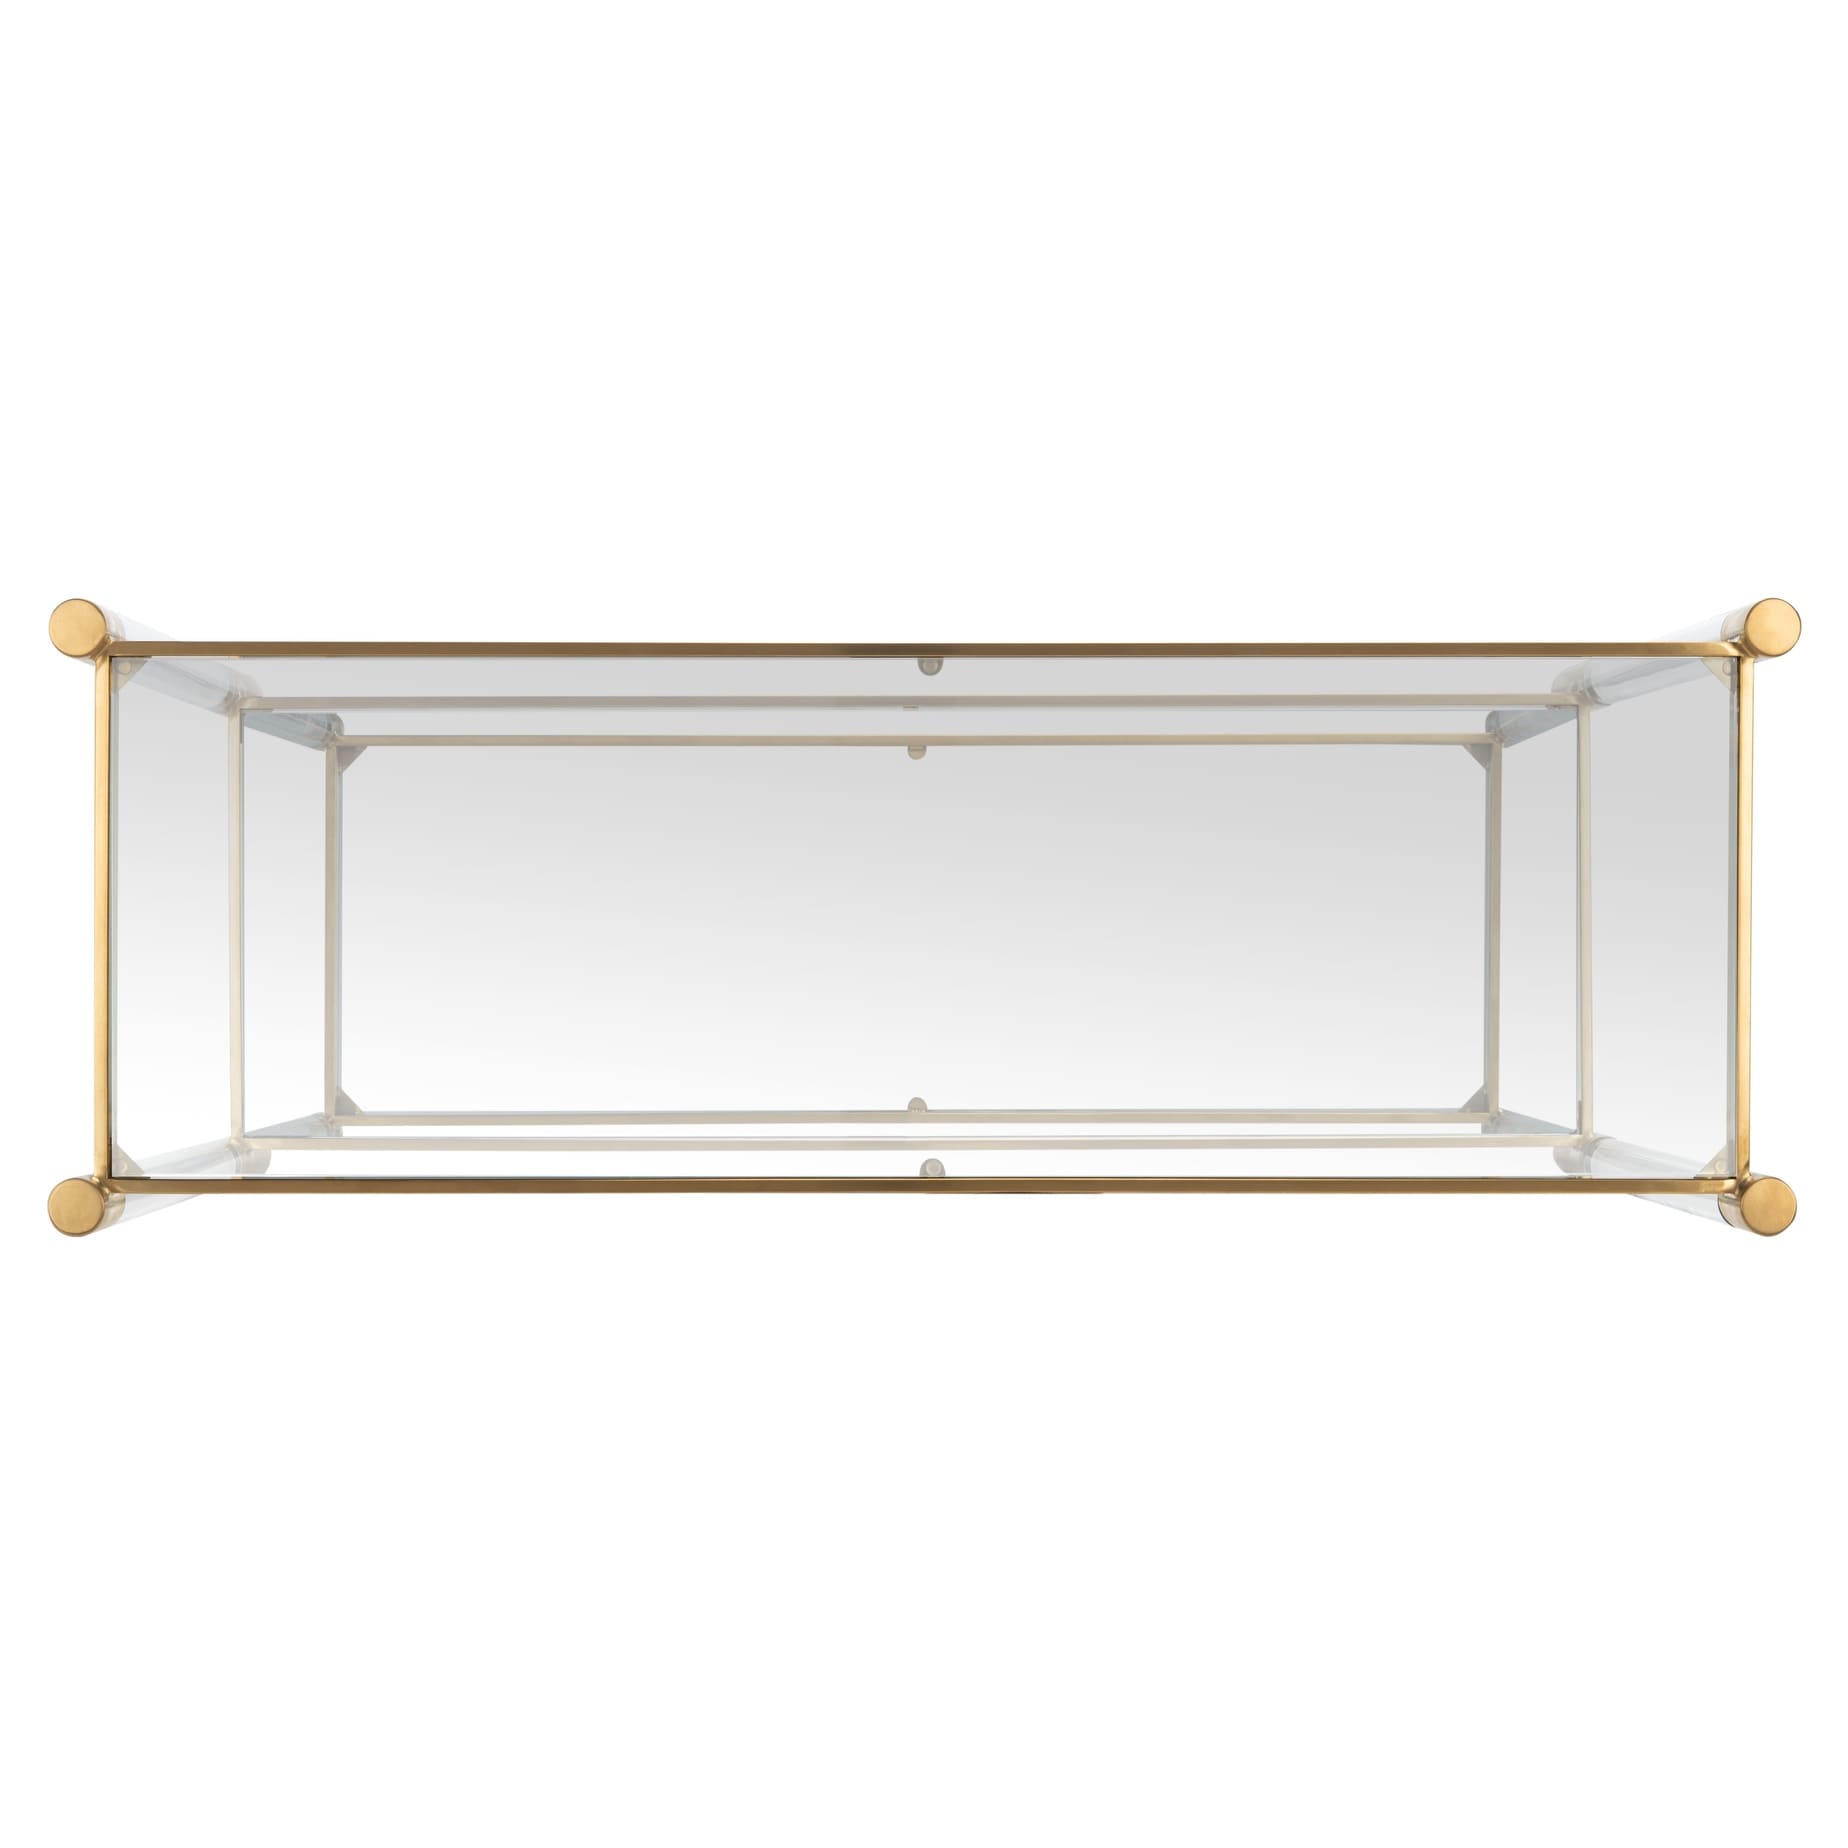 SAFAVIEH Couture Shayla Acrylic Console Table - 48" W x 17" L x 30.7" H